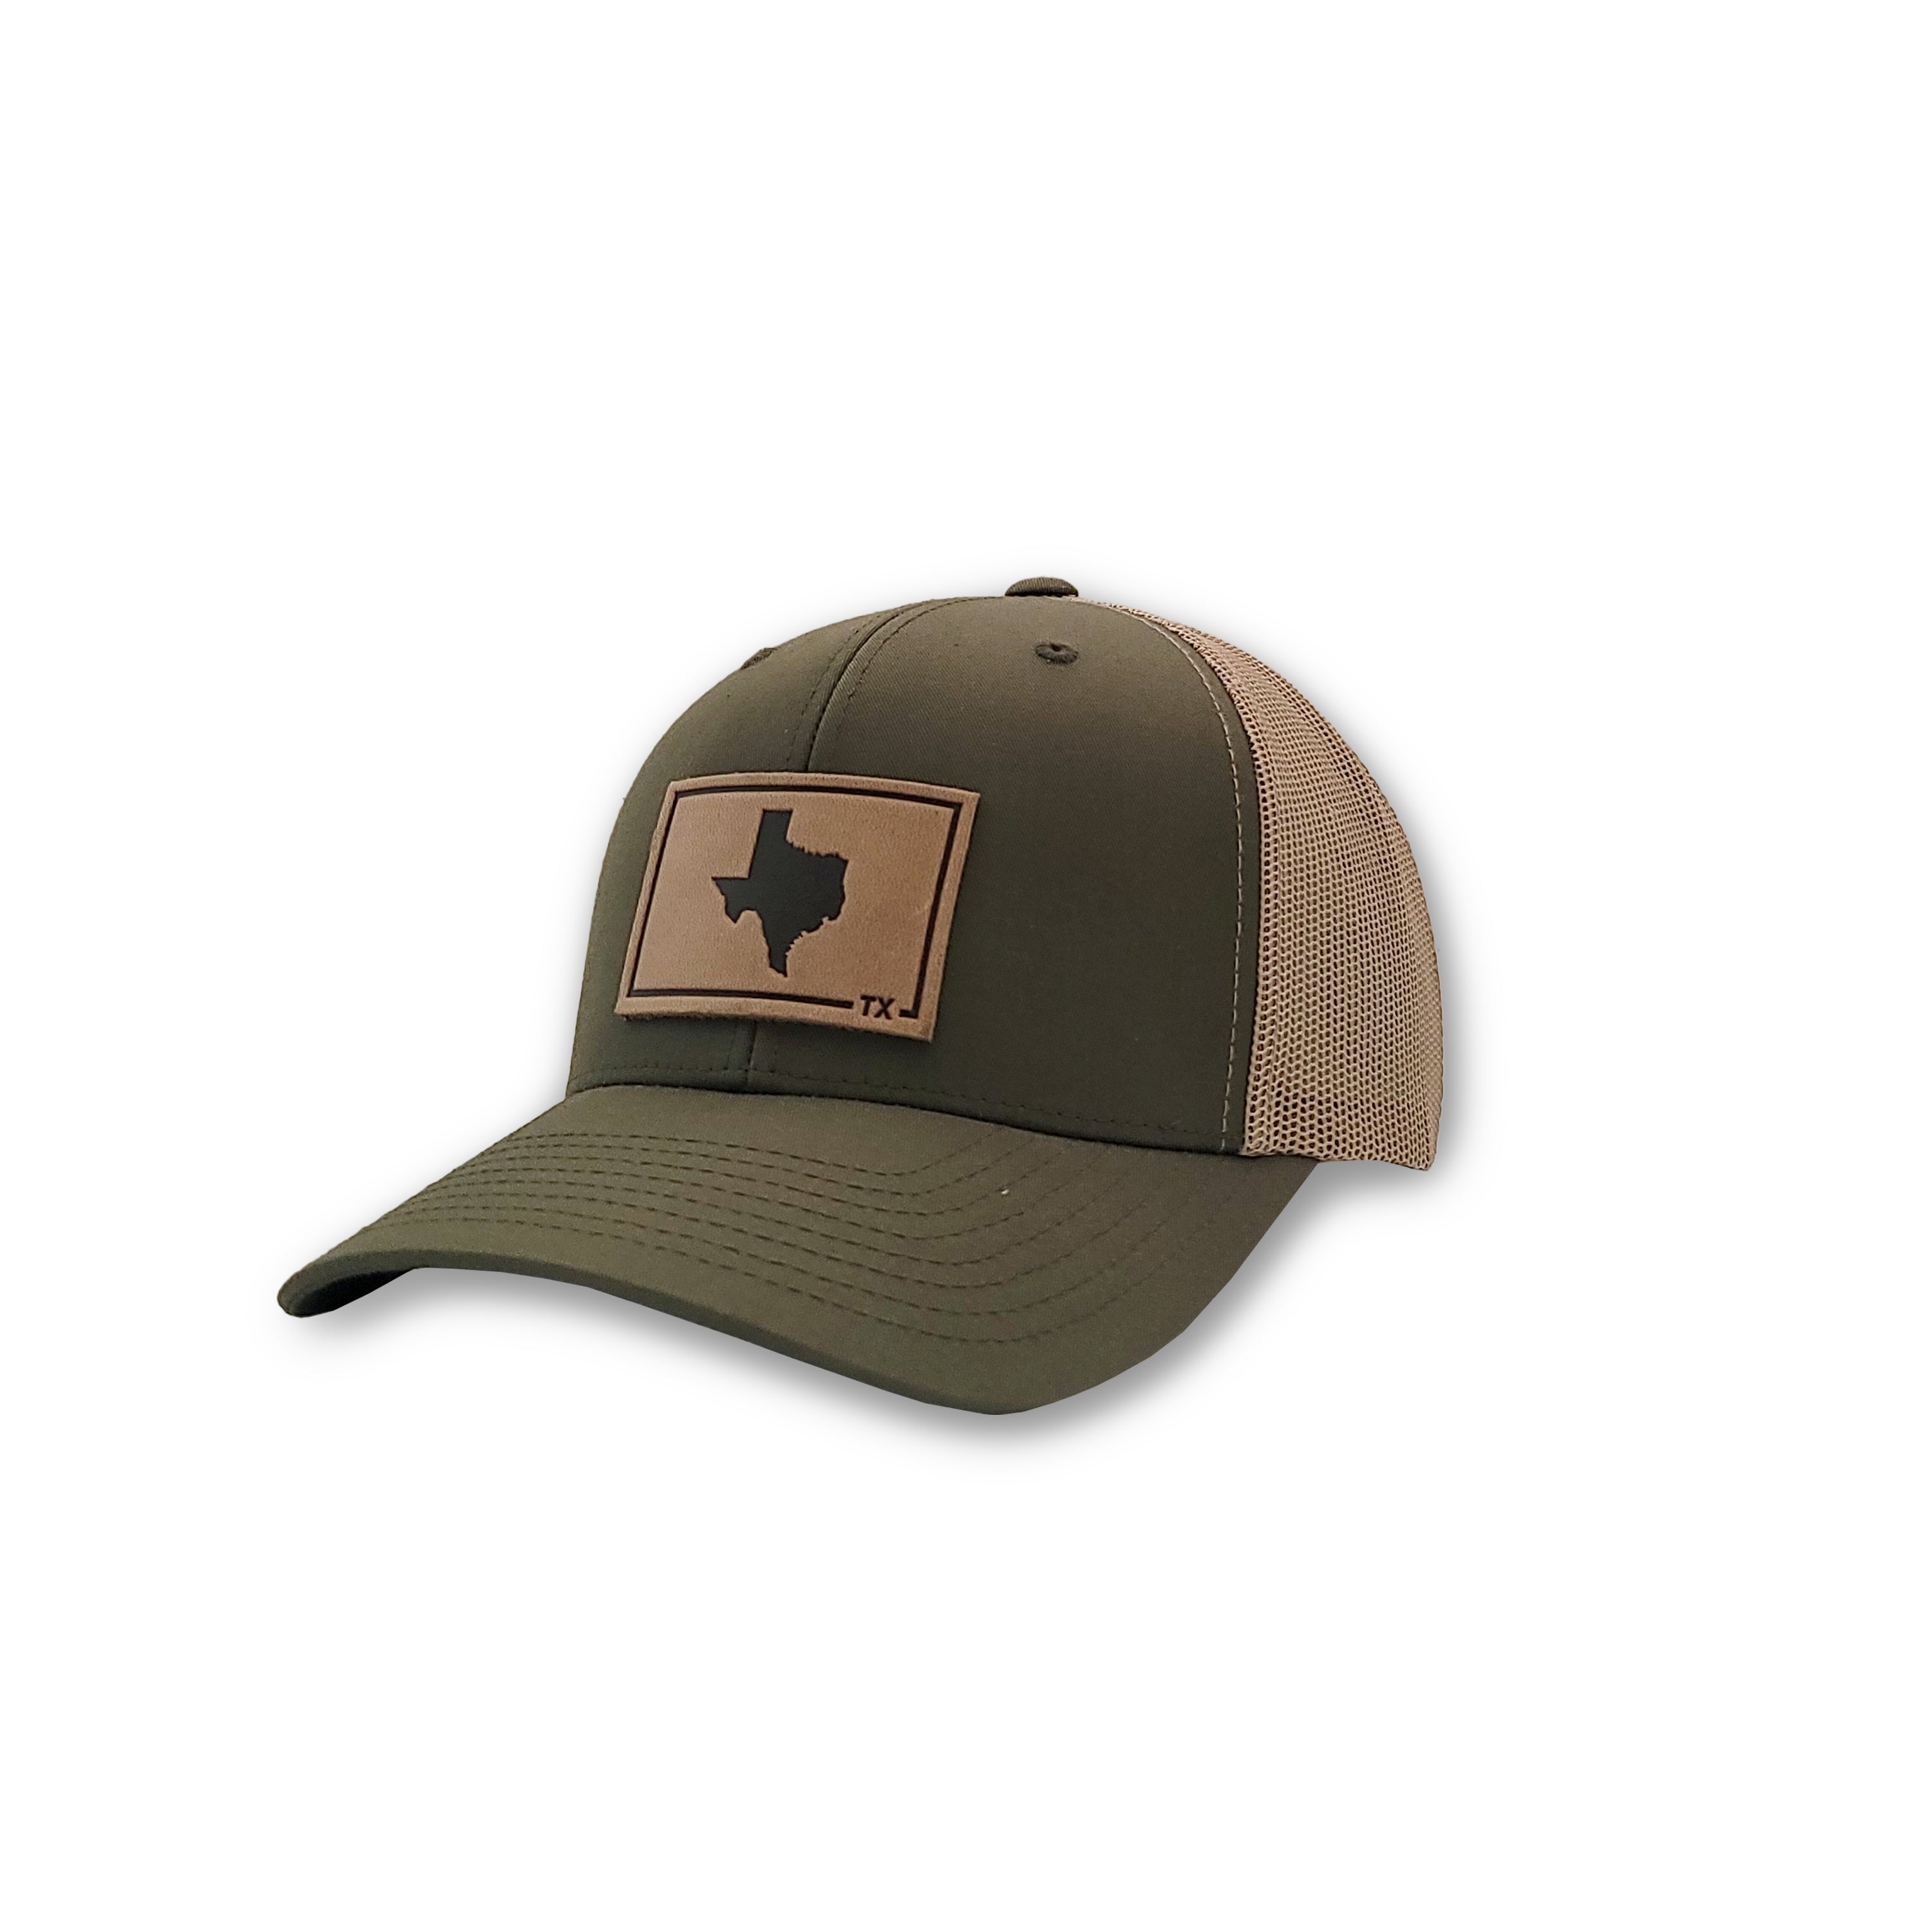 Texas Leather Patch hat by Range Leather Co.